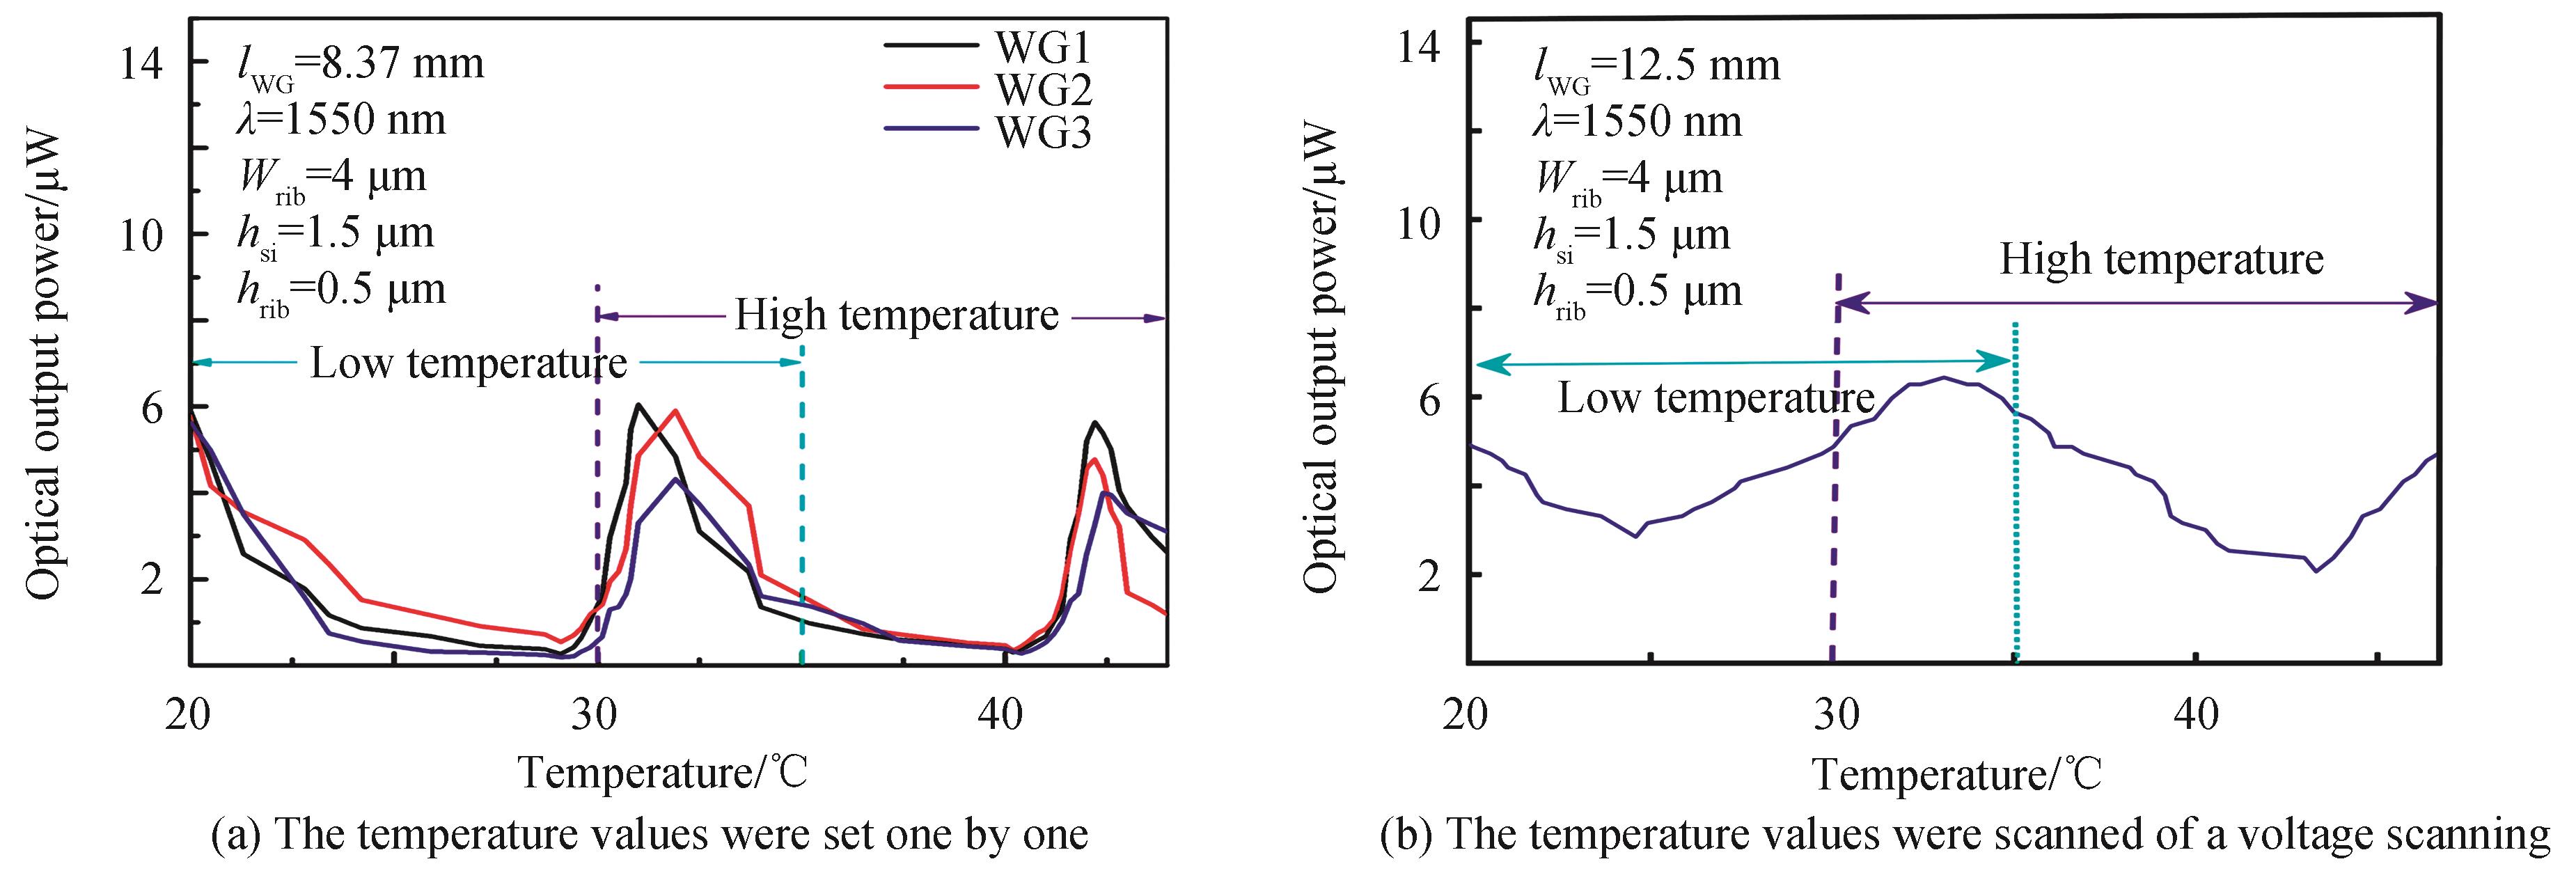 Propagation losses test of three SOI waveguides and the responses of F-P cavity formed by the waveguide channel to temperature change， where the lower temperature ranges are 20 ℃~35 ℃， the high temperature range are 30 ℃~45 ℃